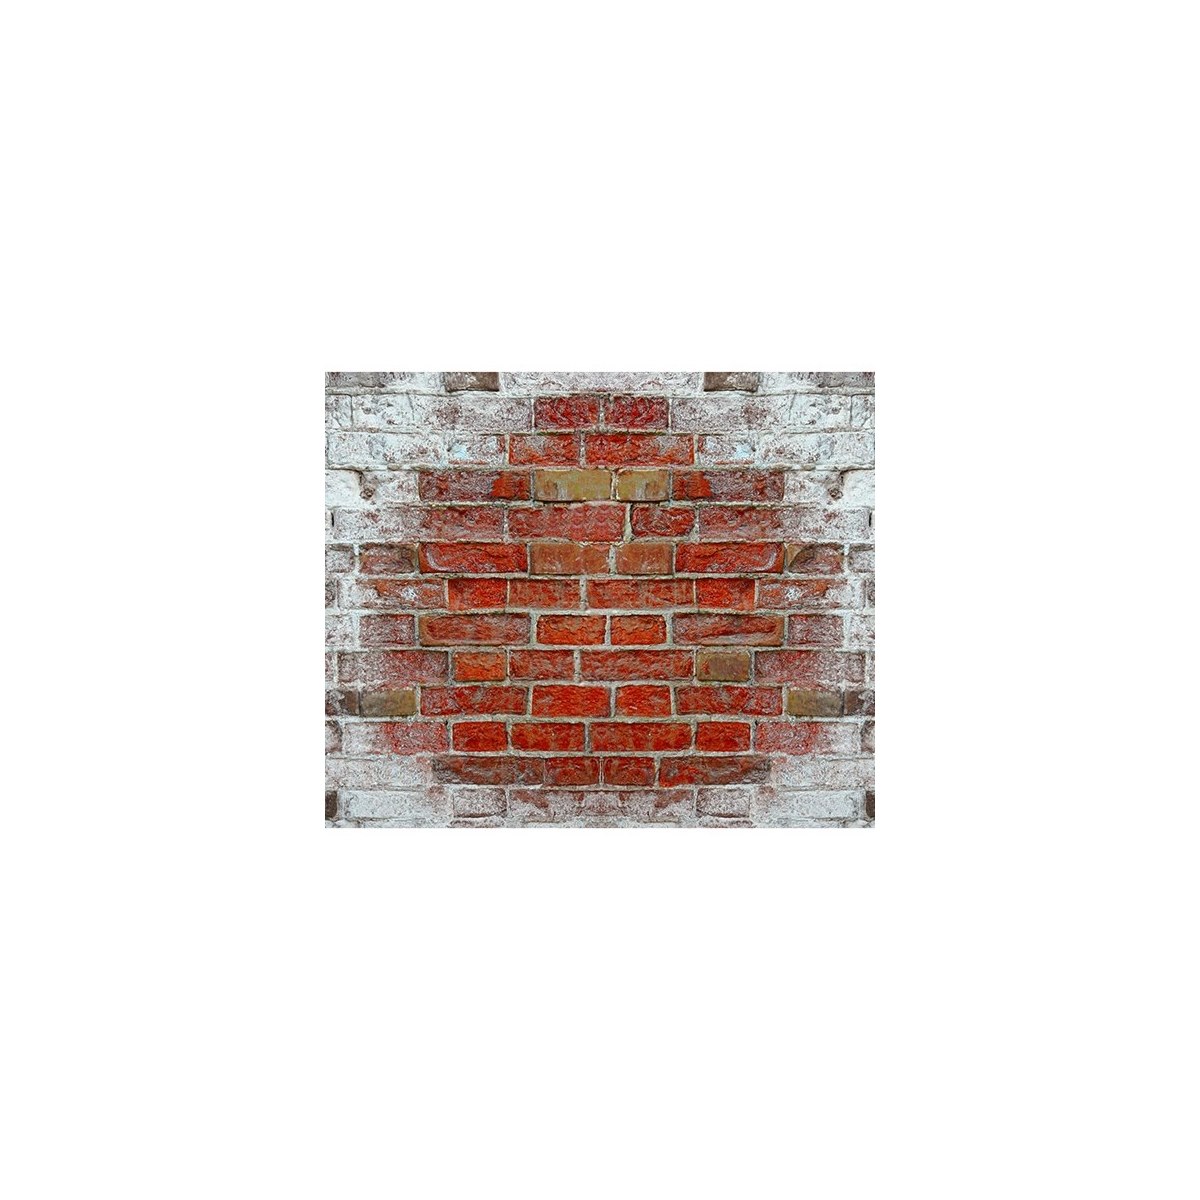 How to Remove Efflourescence from Brickwork